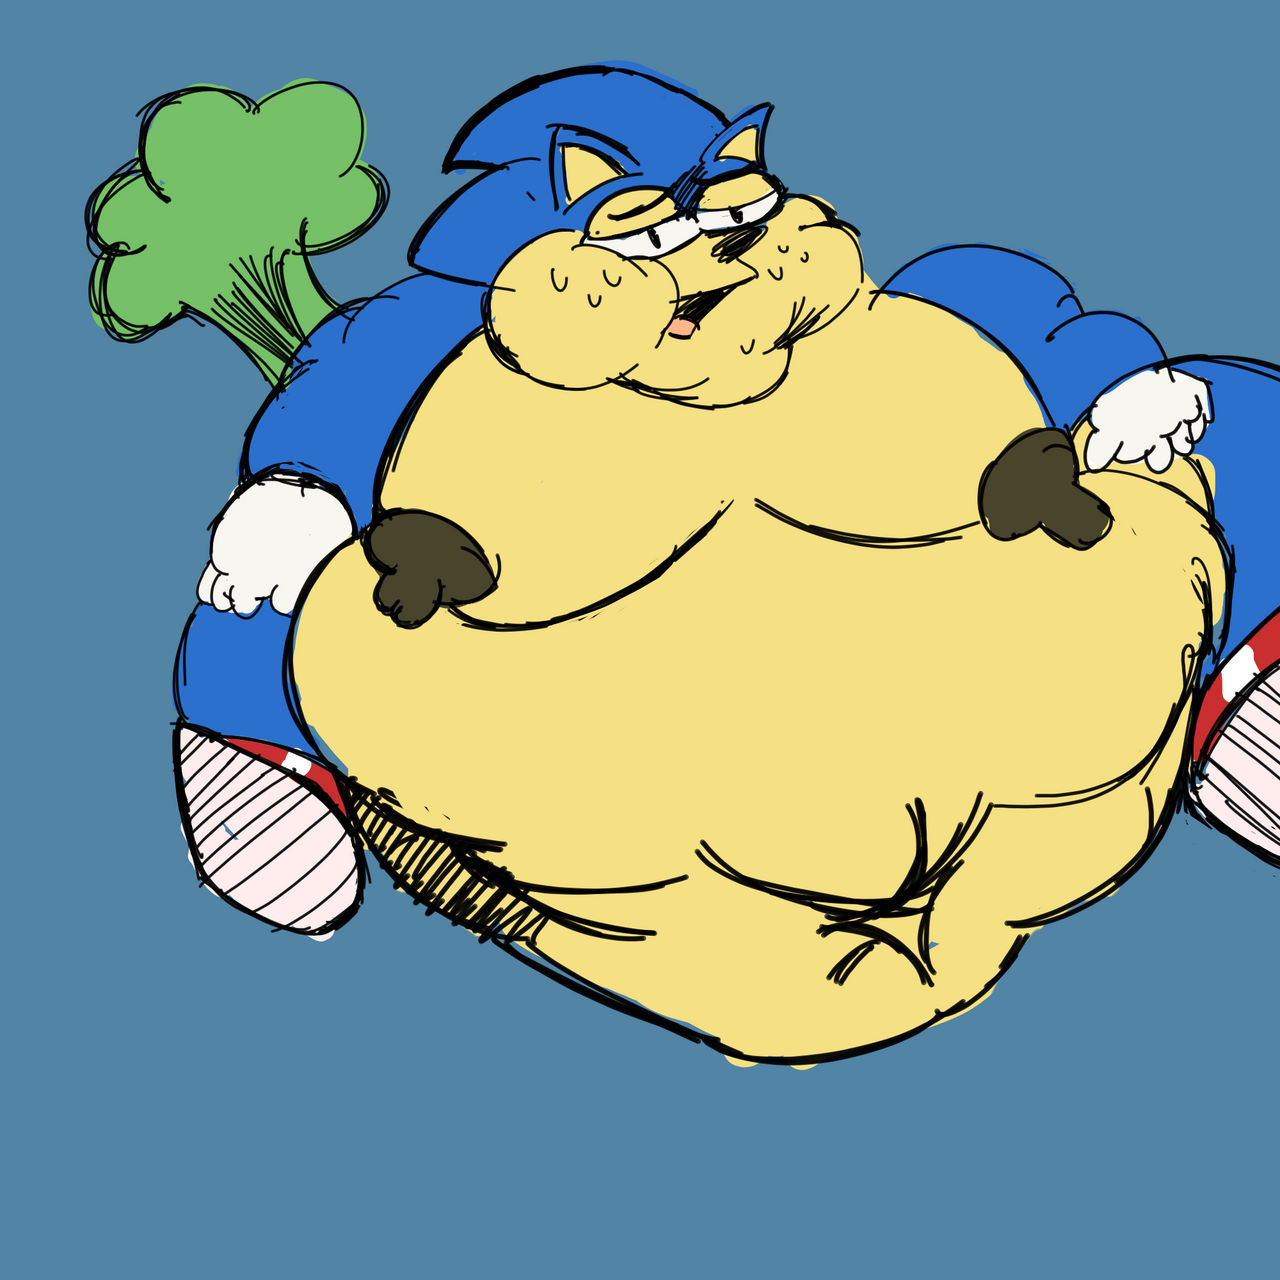 I tried redrawing that one fat sonic sprite by skullhing on DeviantArt